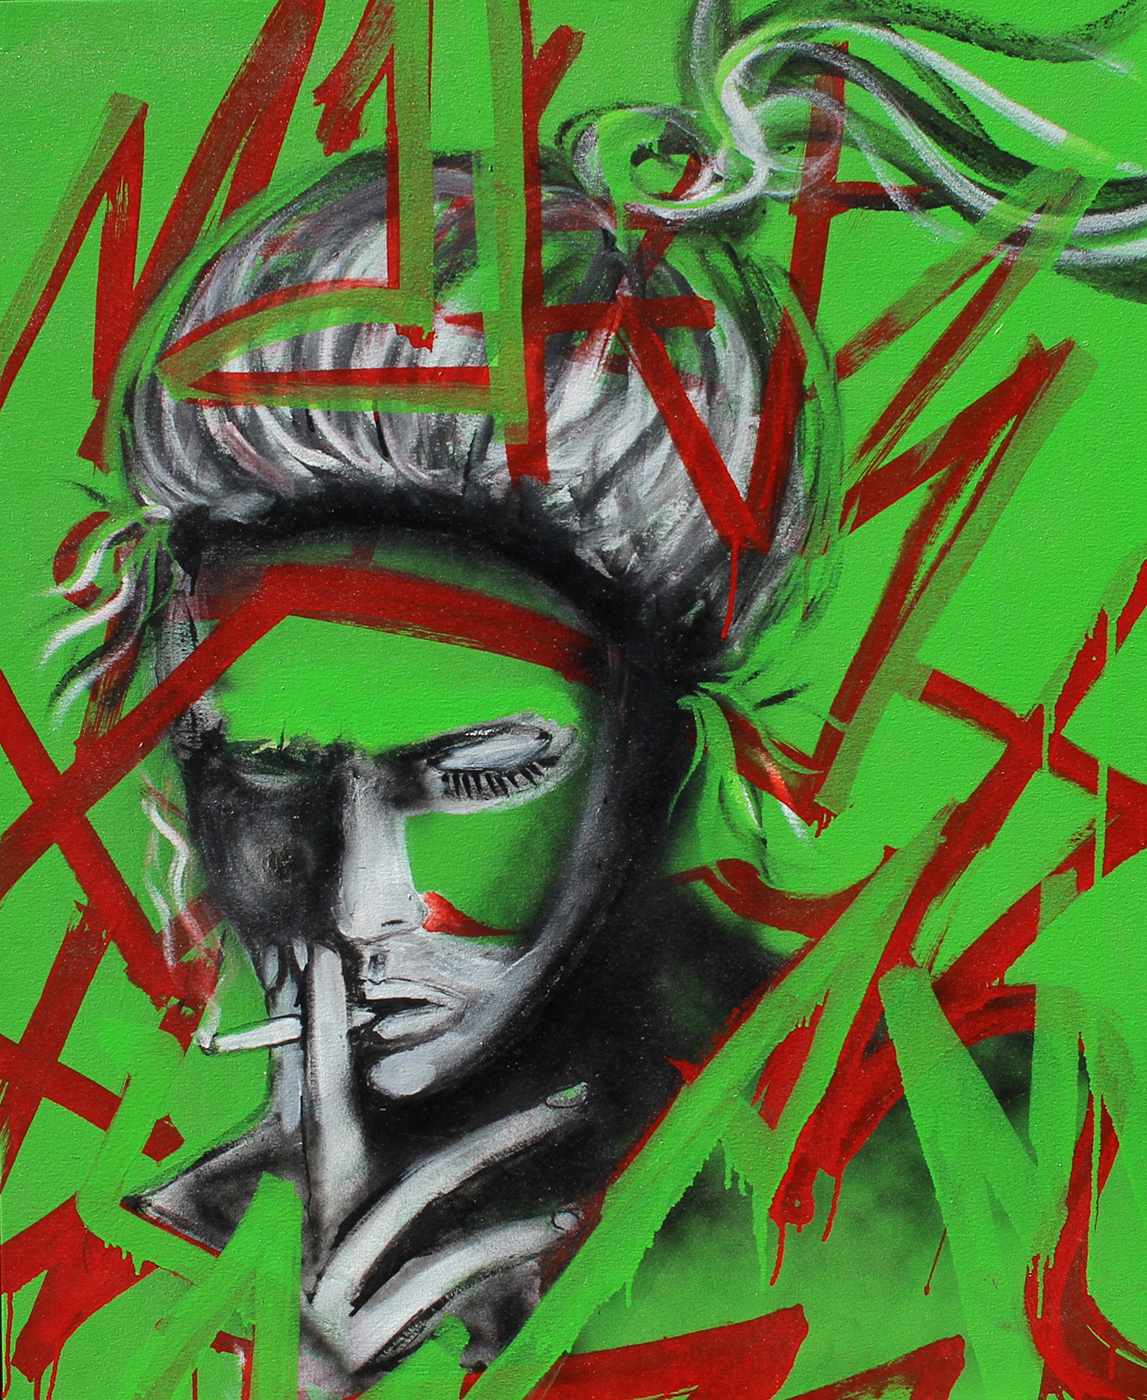 Cigarret Girl,2015 ( Street Caligraphy) Paint 34,5 x 41,5 inches